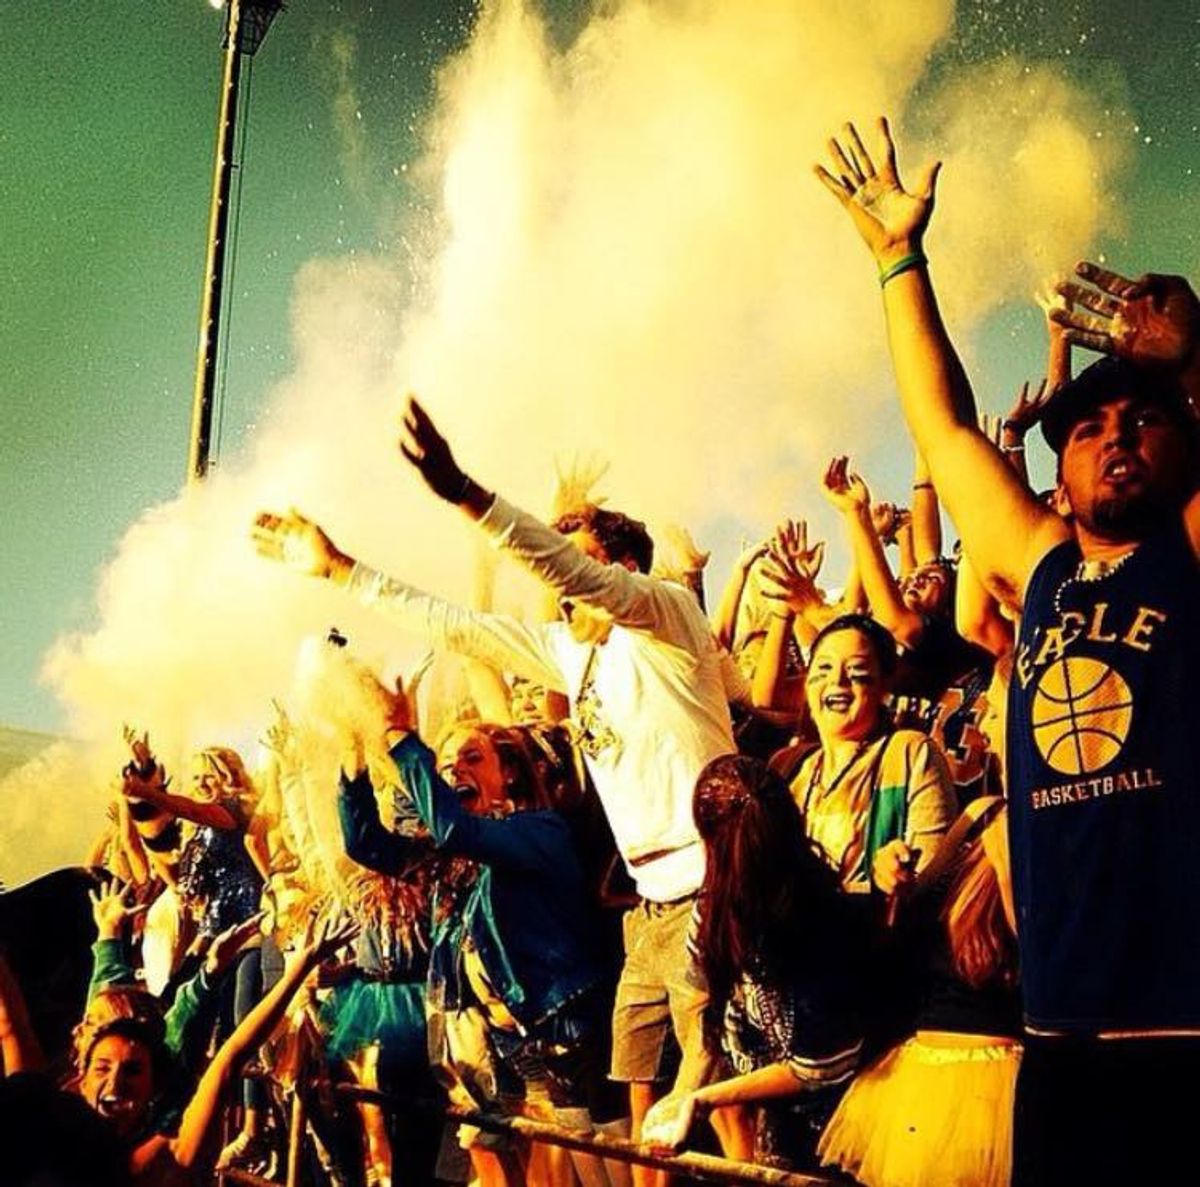 11 Things High School Students Care About That Do Not Matter To College Students